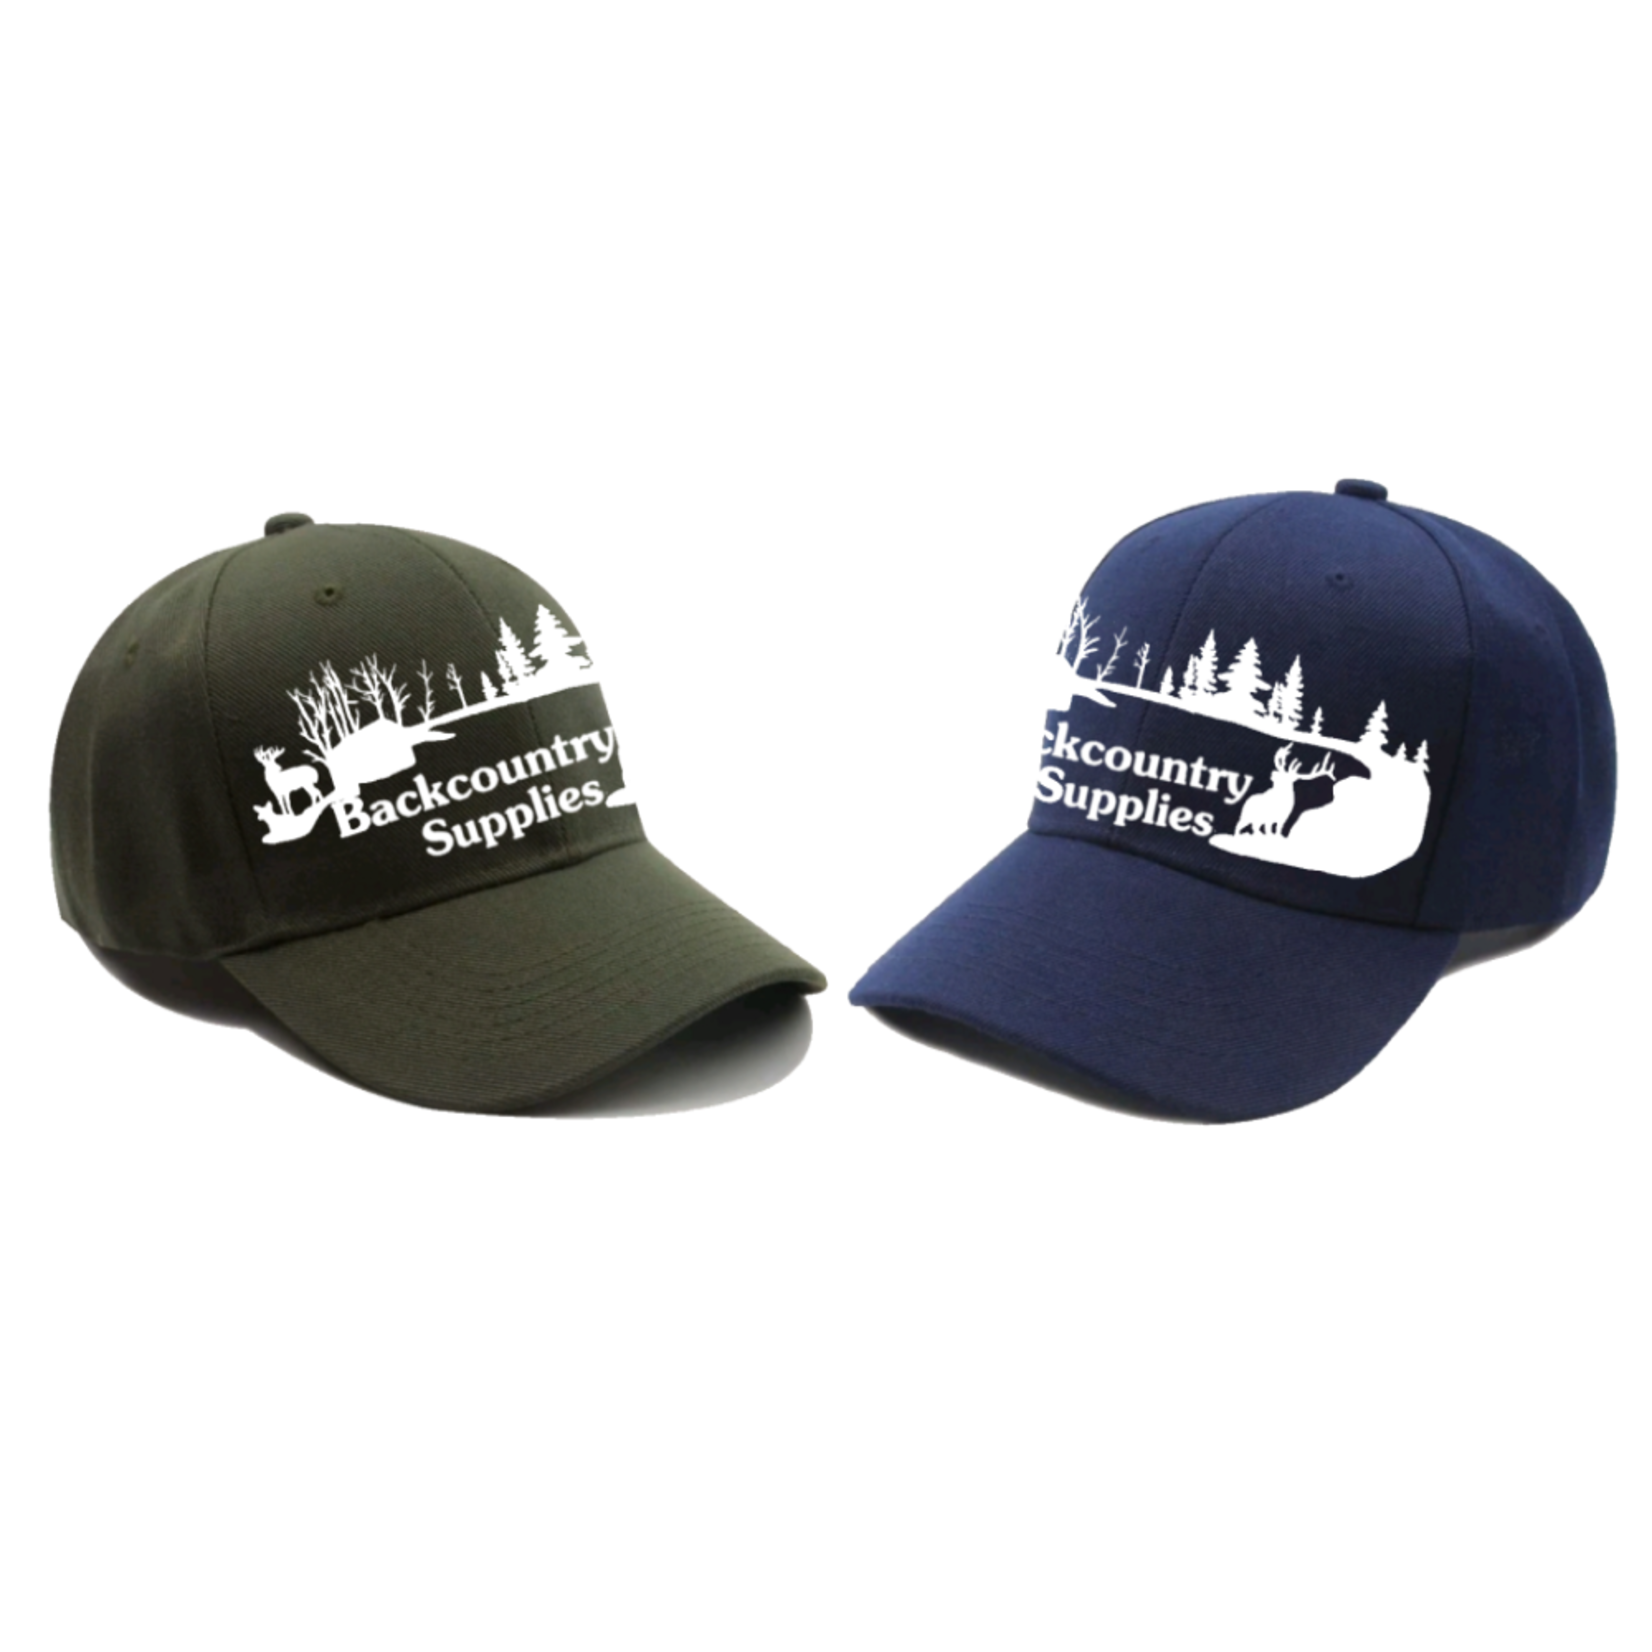 Realtree Backcountry Supplies Adjustable Hat